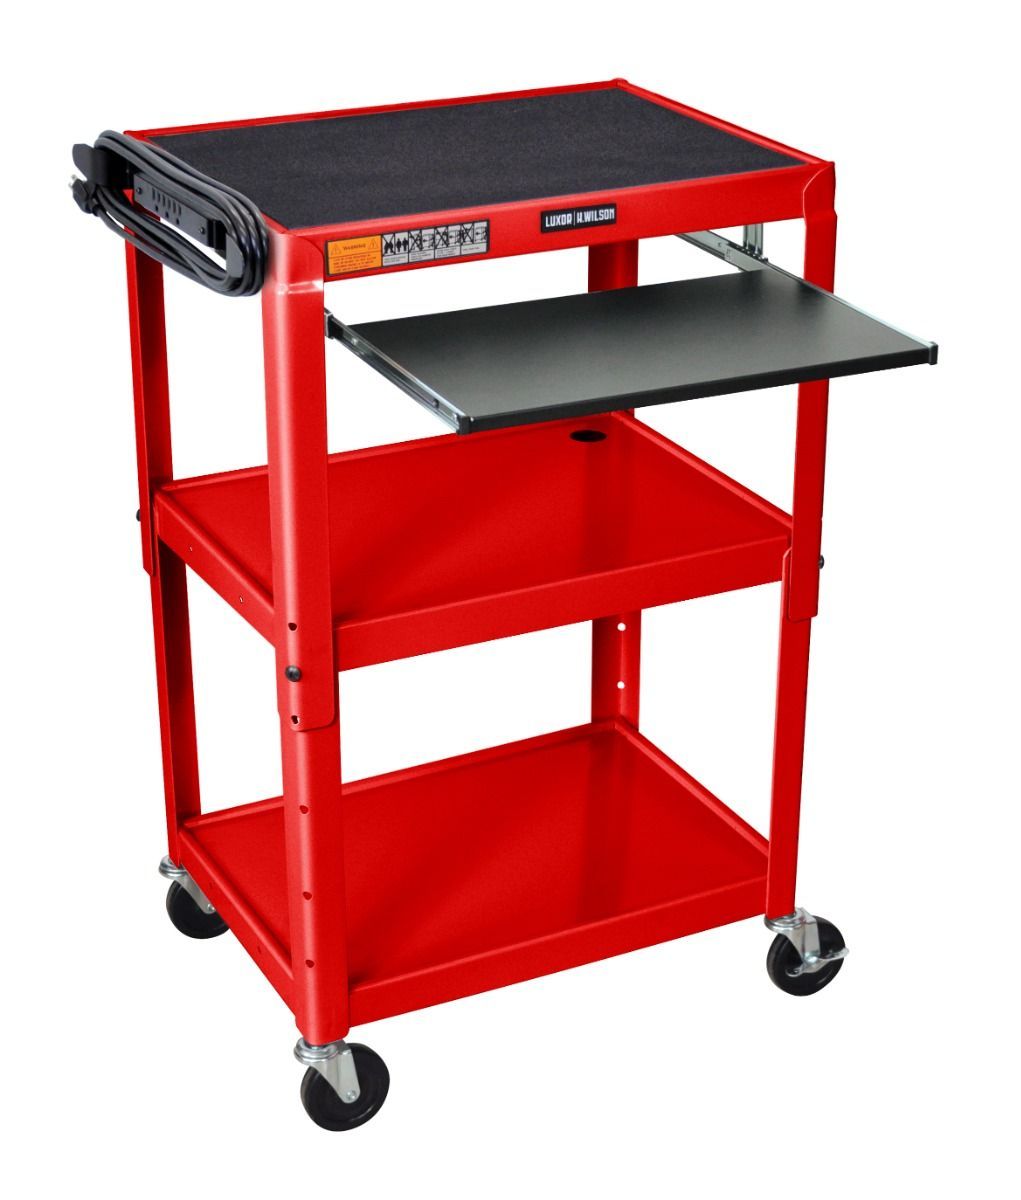 Luxor Adjustable-Height Steel Utility Cart [Red, w/ Pullout Keyboard Tray] - UCMT1KB-RD Image 1